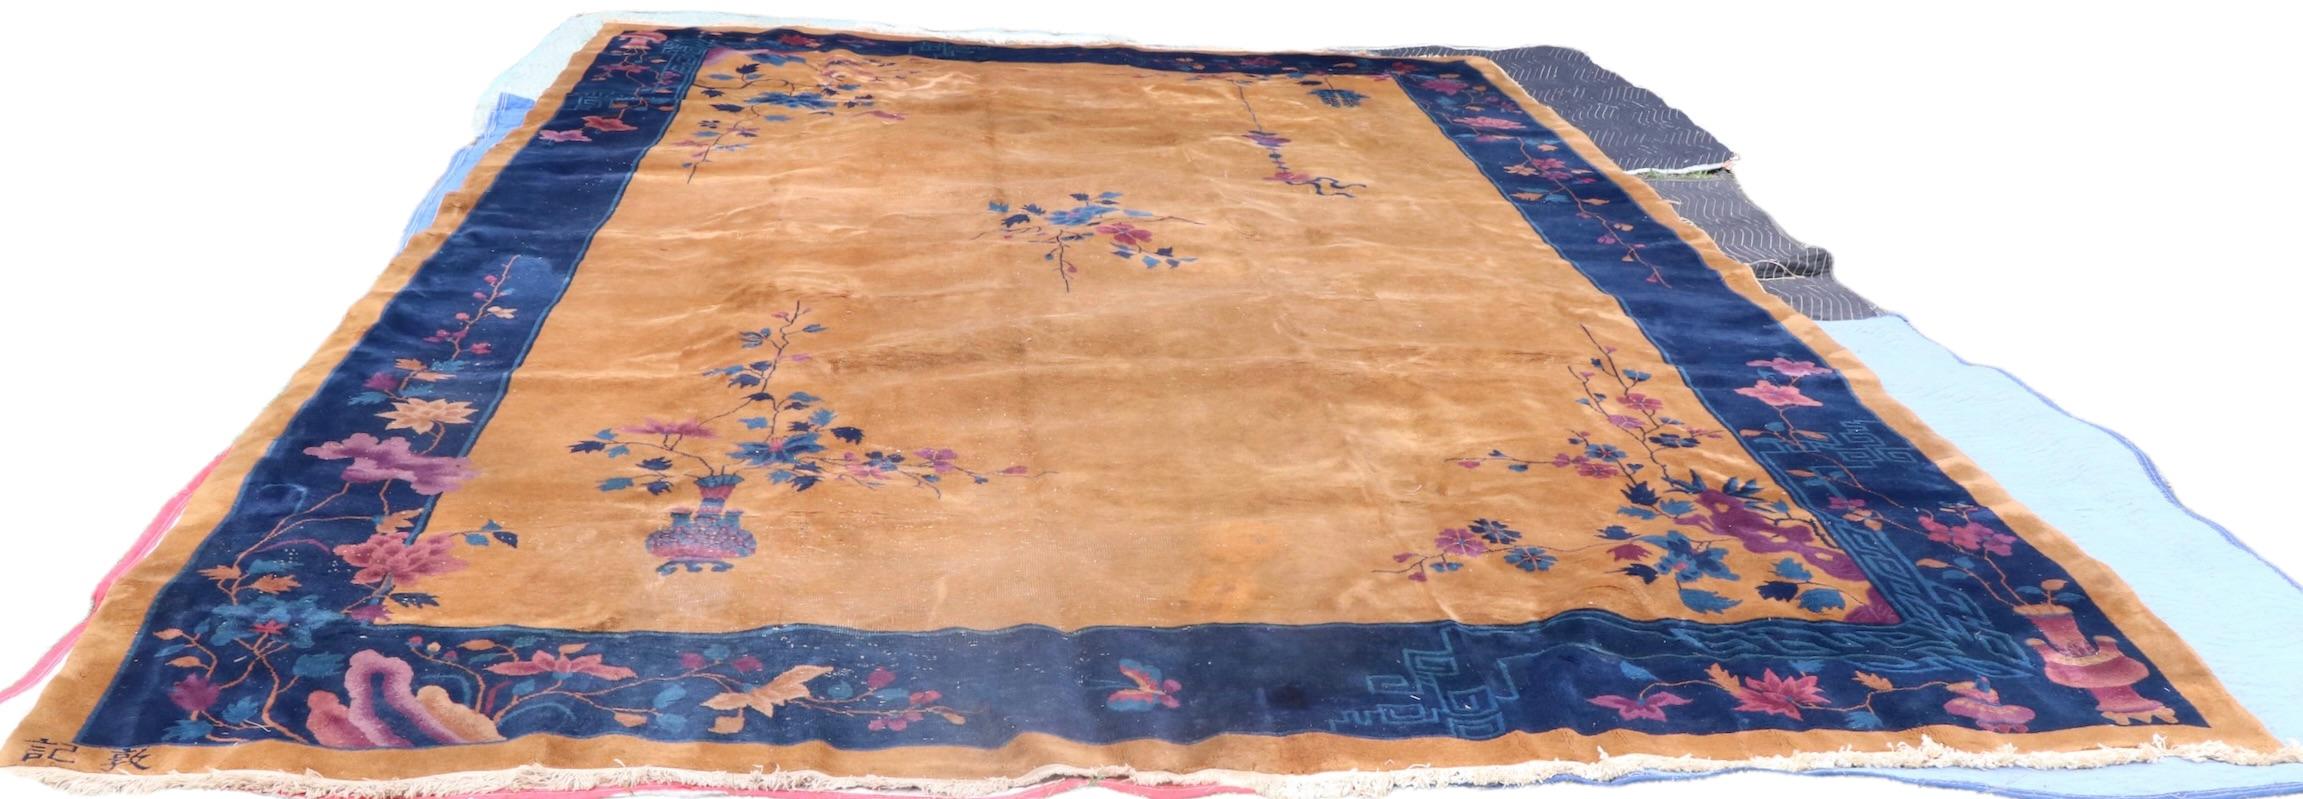  Palace Size Chinese Art Deco Rug att. to Walter Nichols ca. 1920/1930's For Sale 2